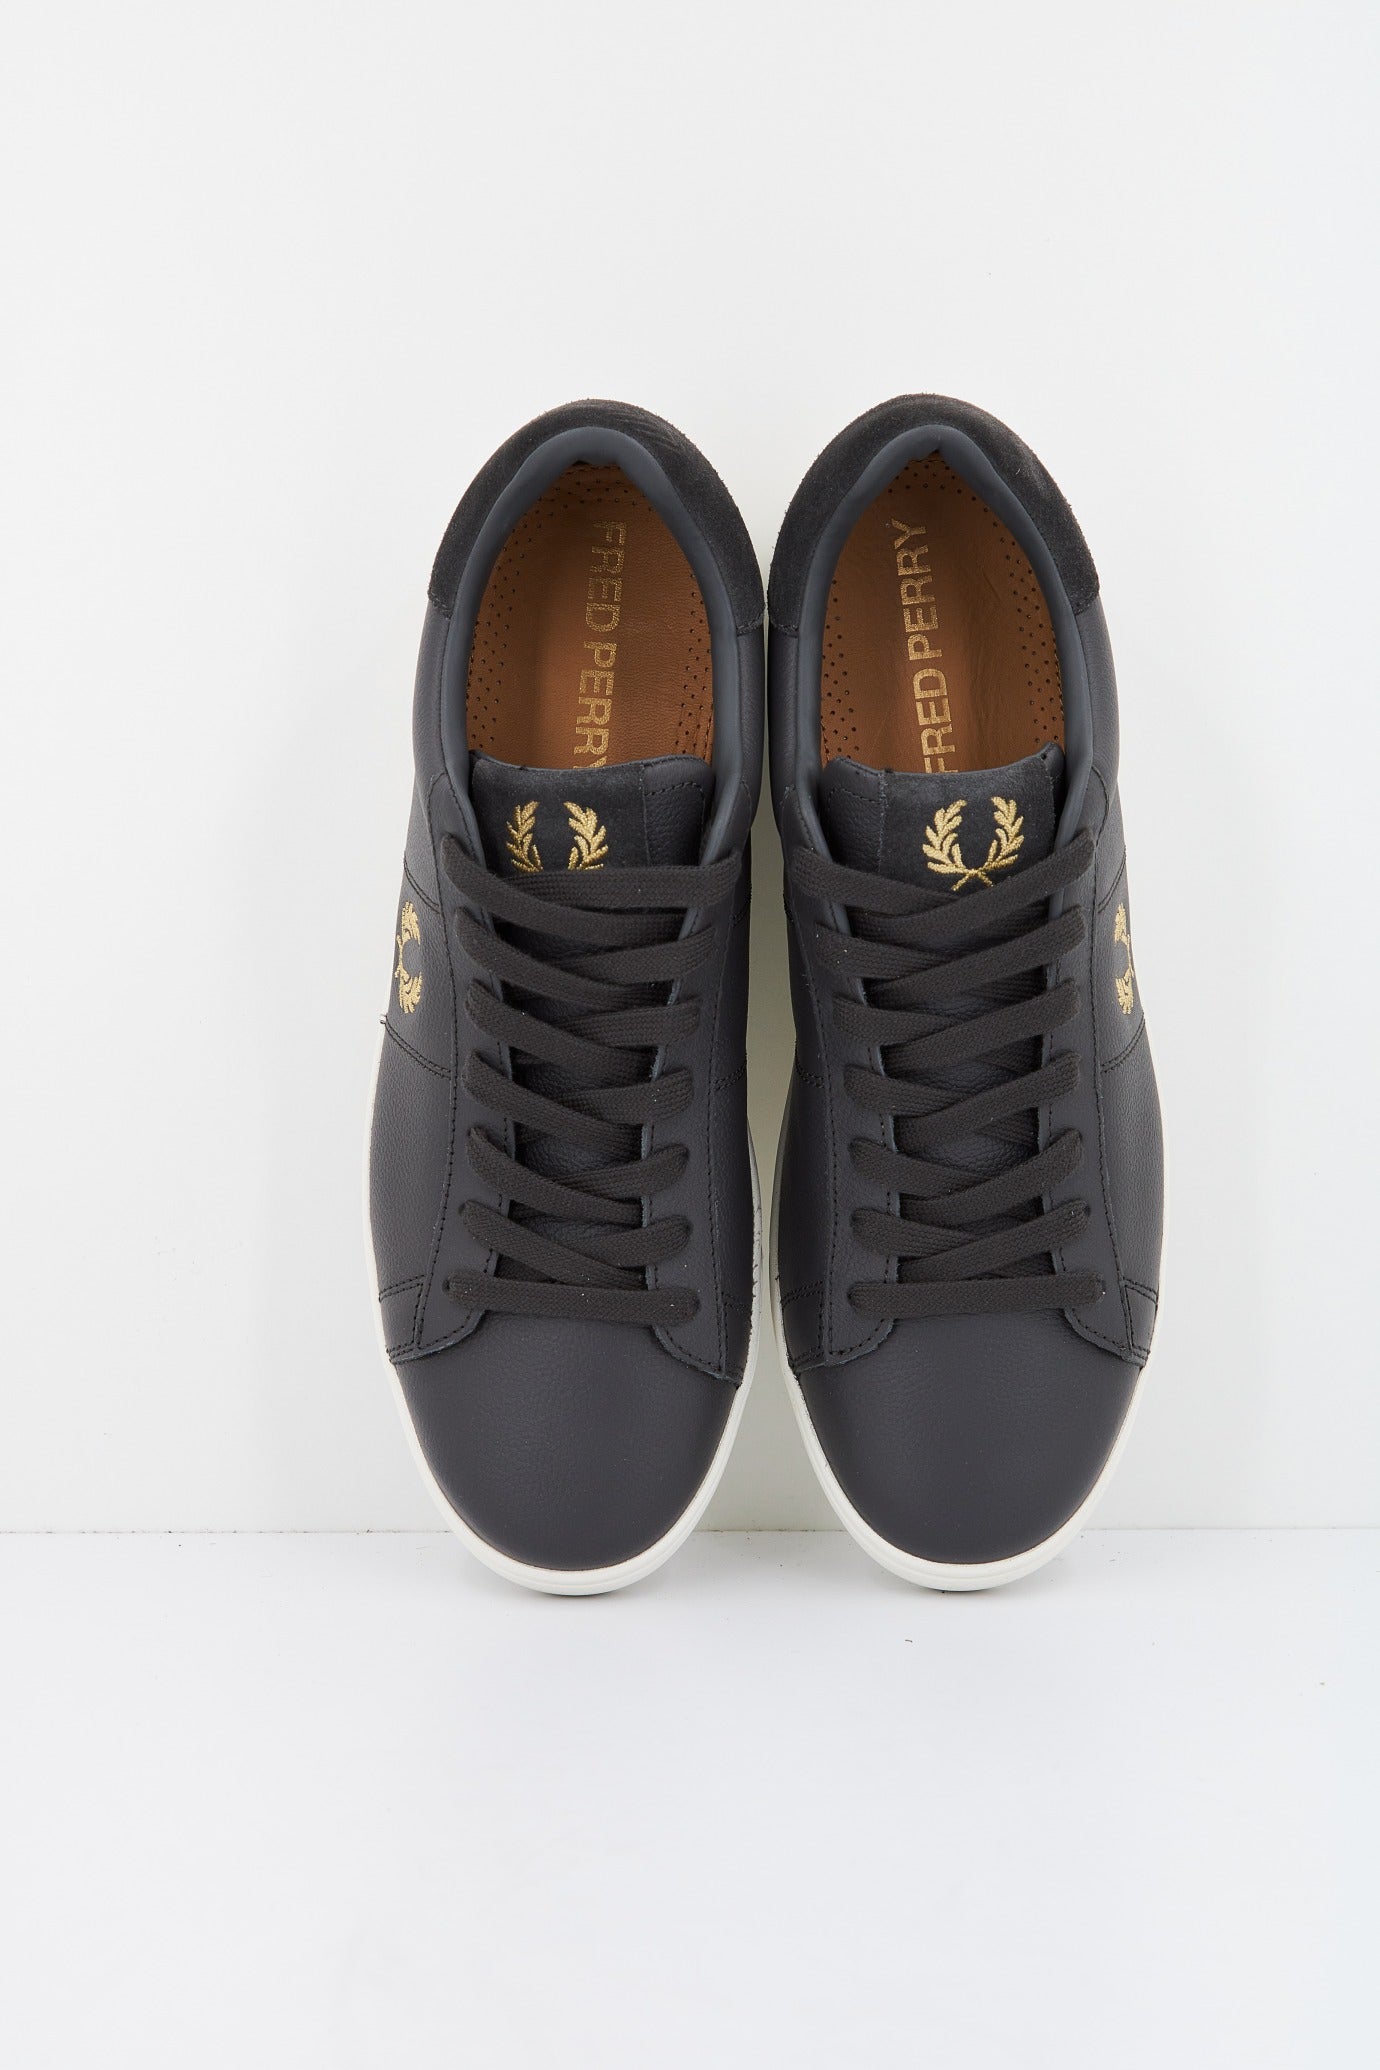 FRED PERRY SPENCER TUMBLED LTH en color GRIS  (2)